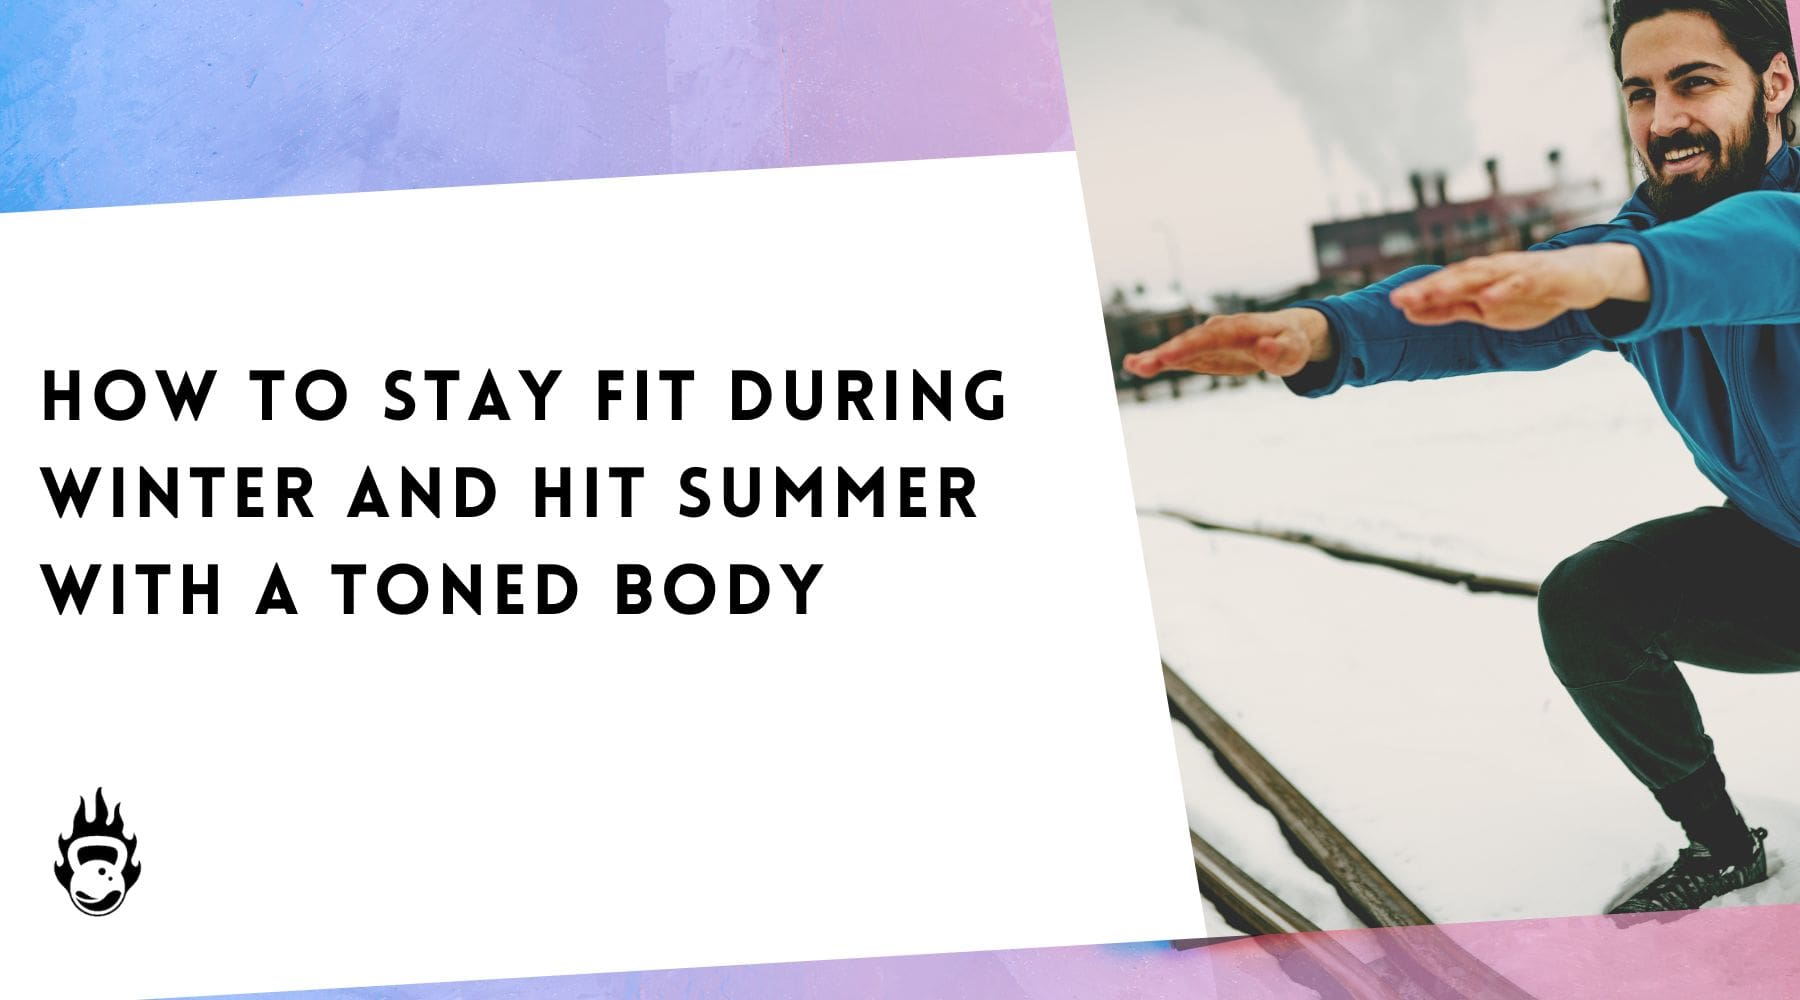 How To Stay Fit During Winter And Hit Summer With A Toned Body